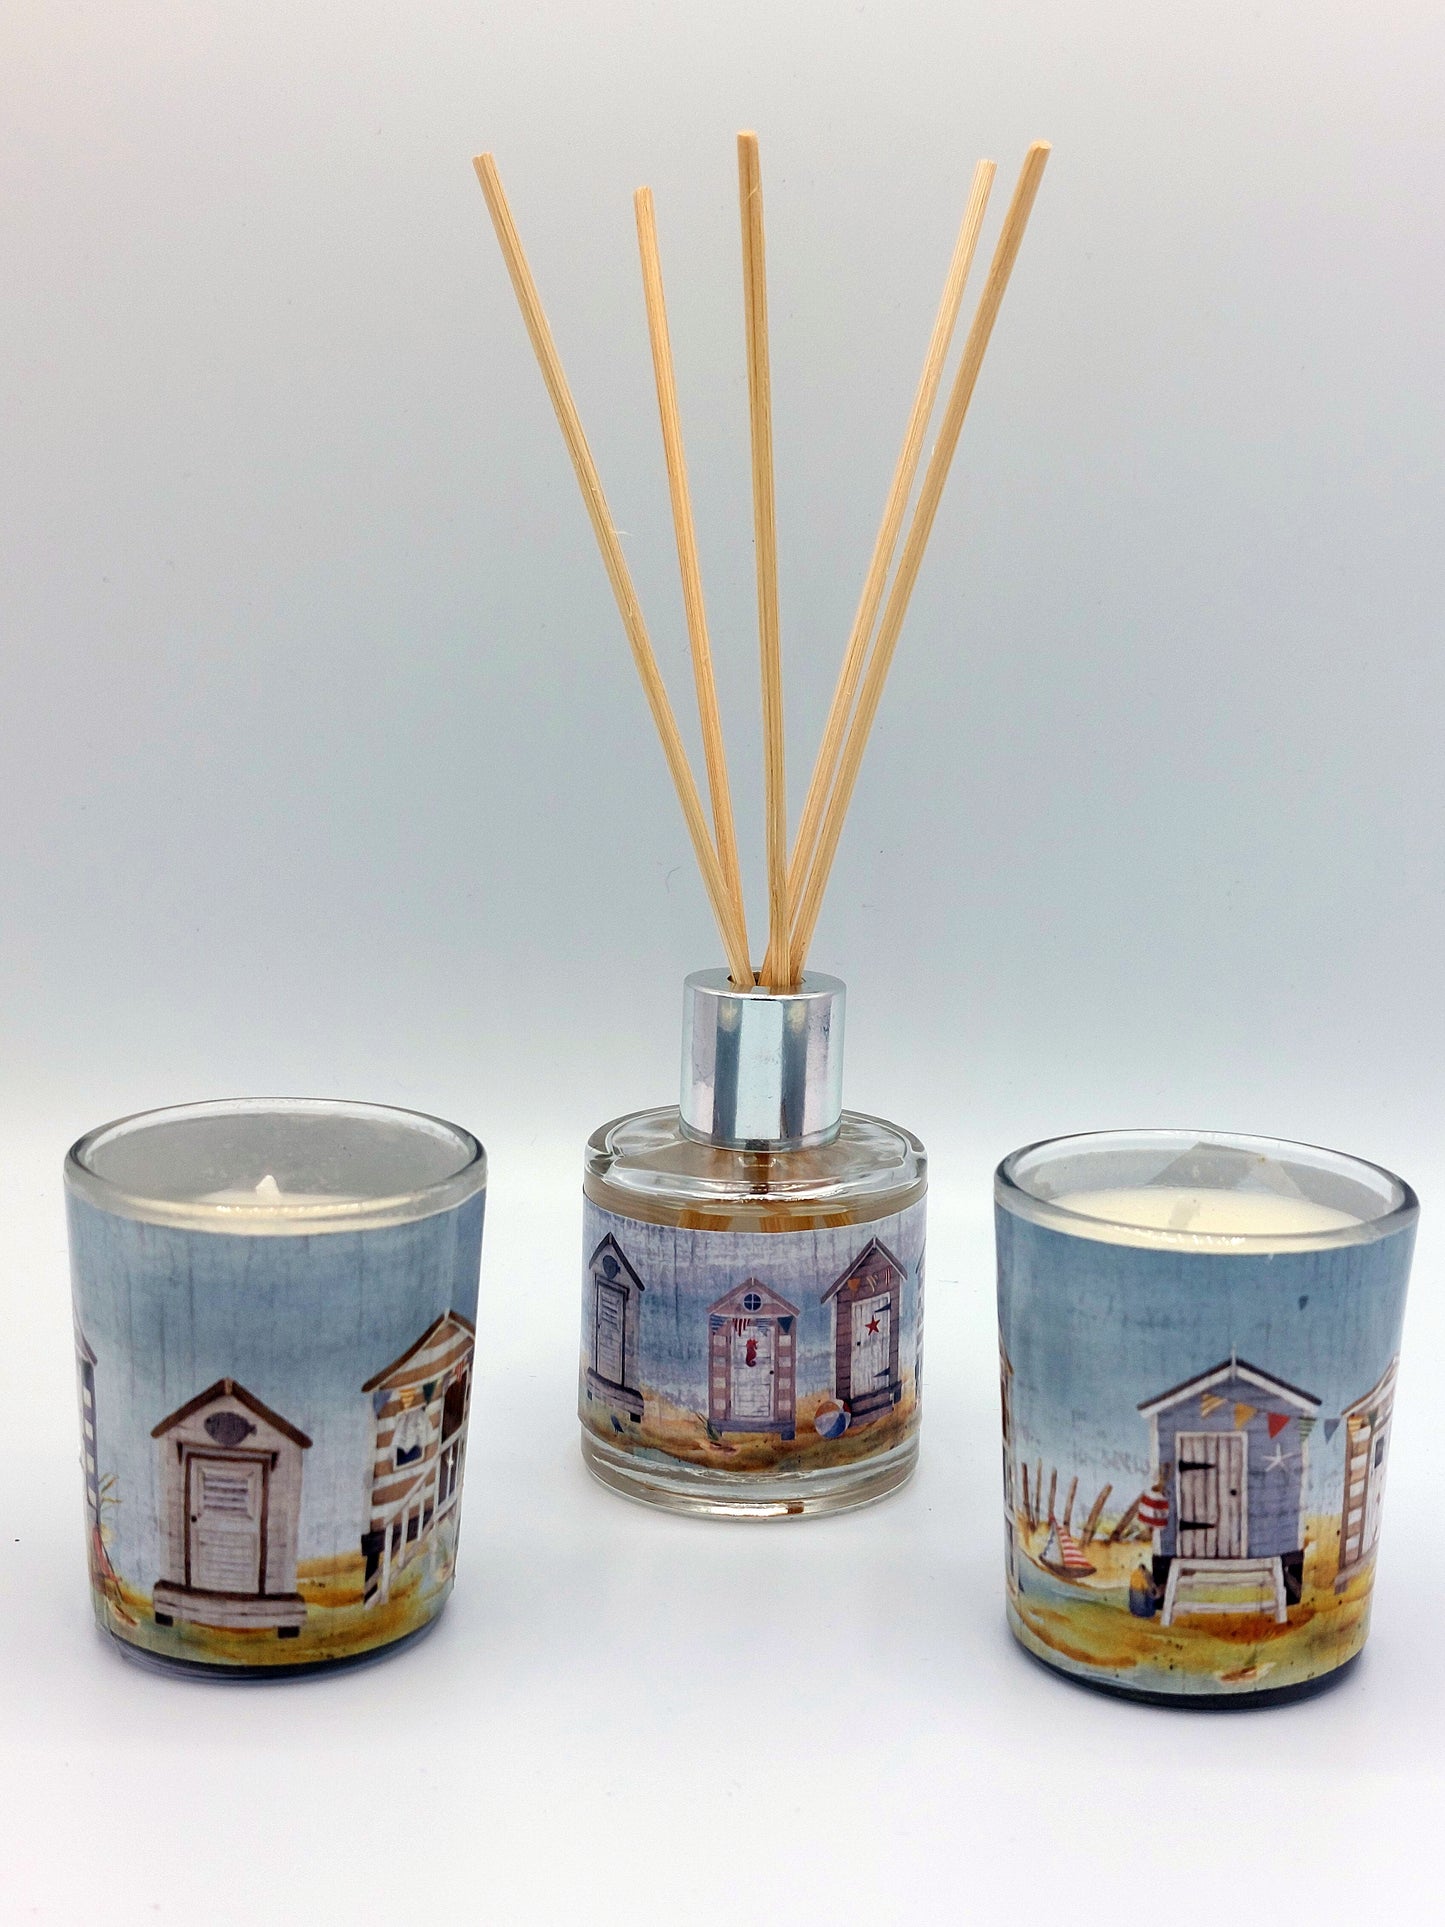 Beach Hut Diffuser and Candle set